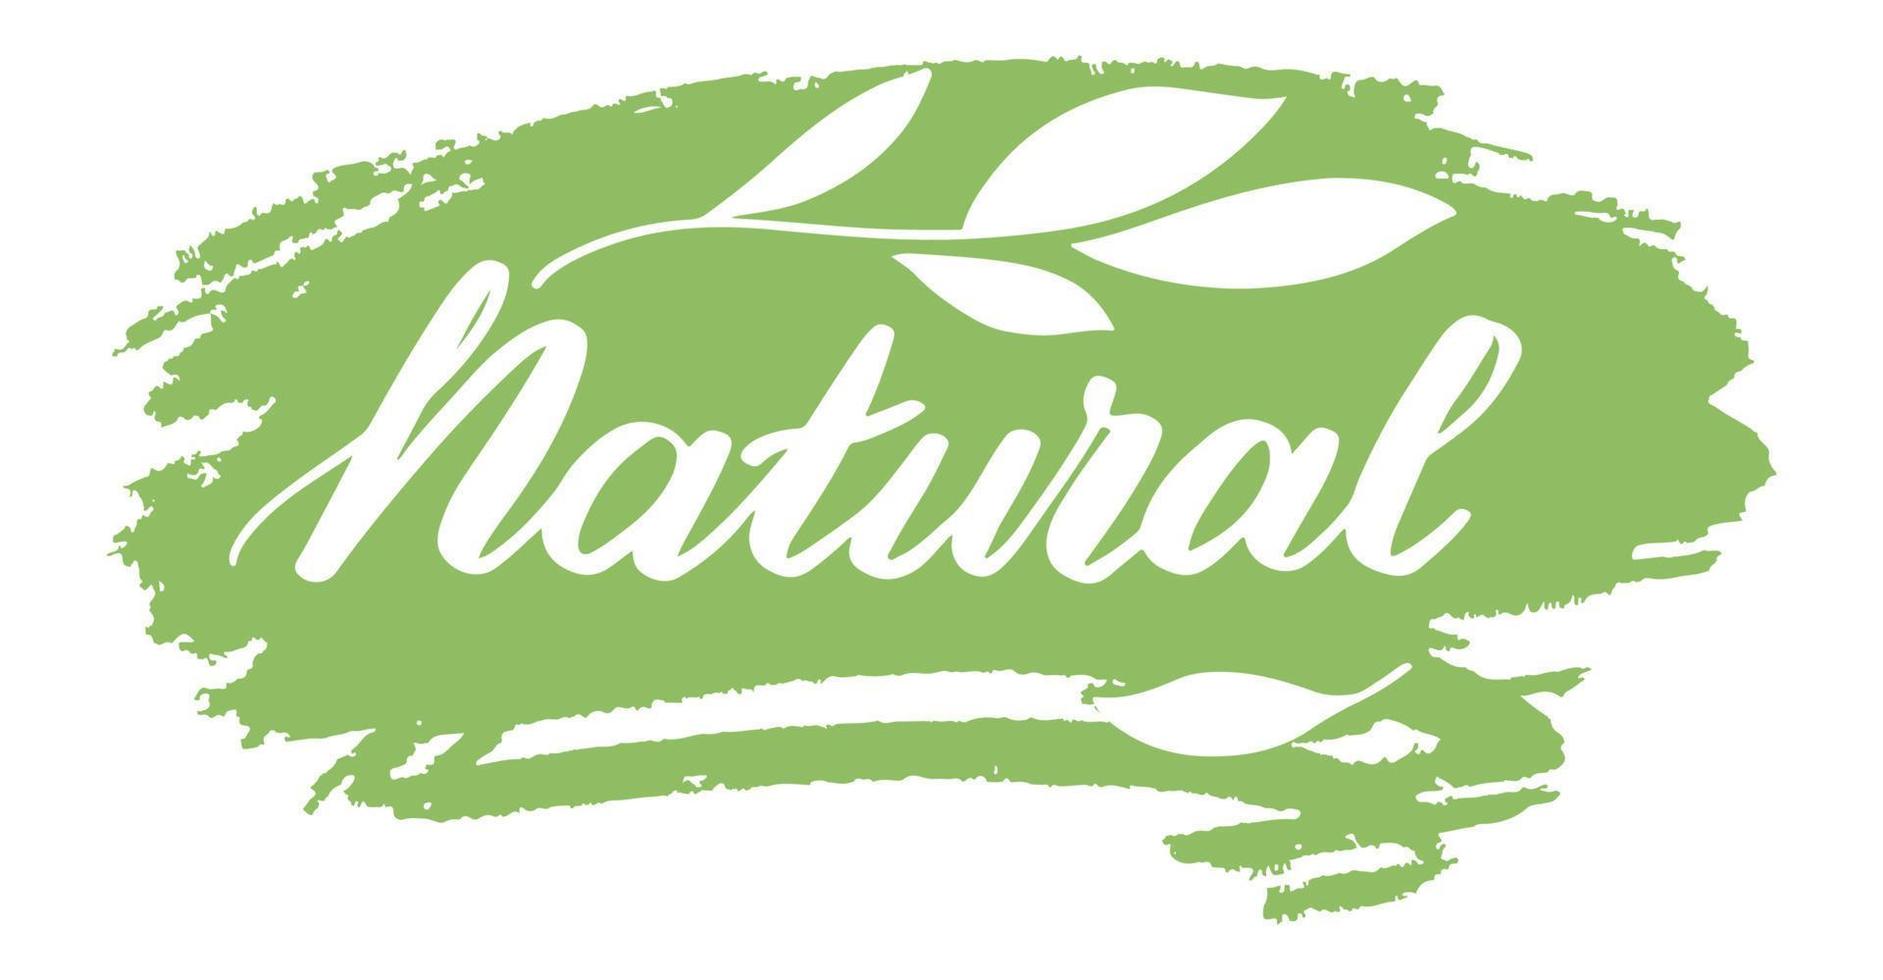 Natural and ecological products, banner with leaf vector